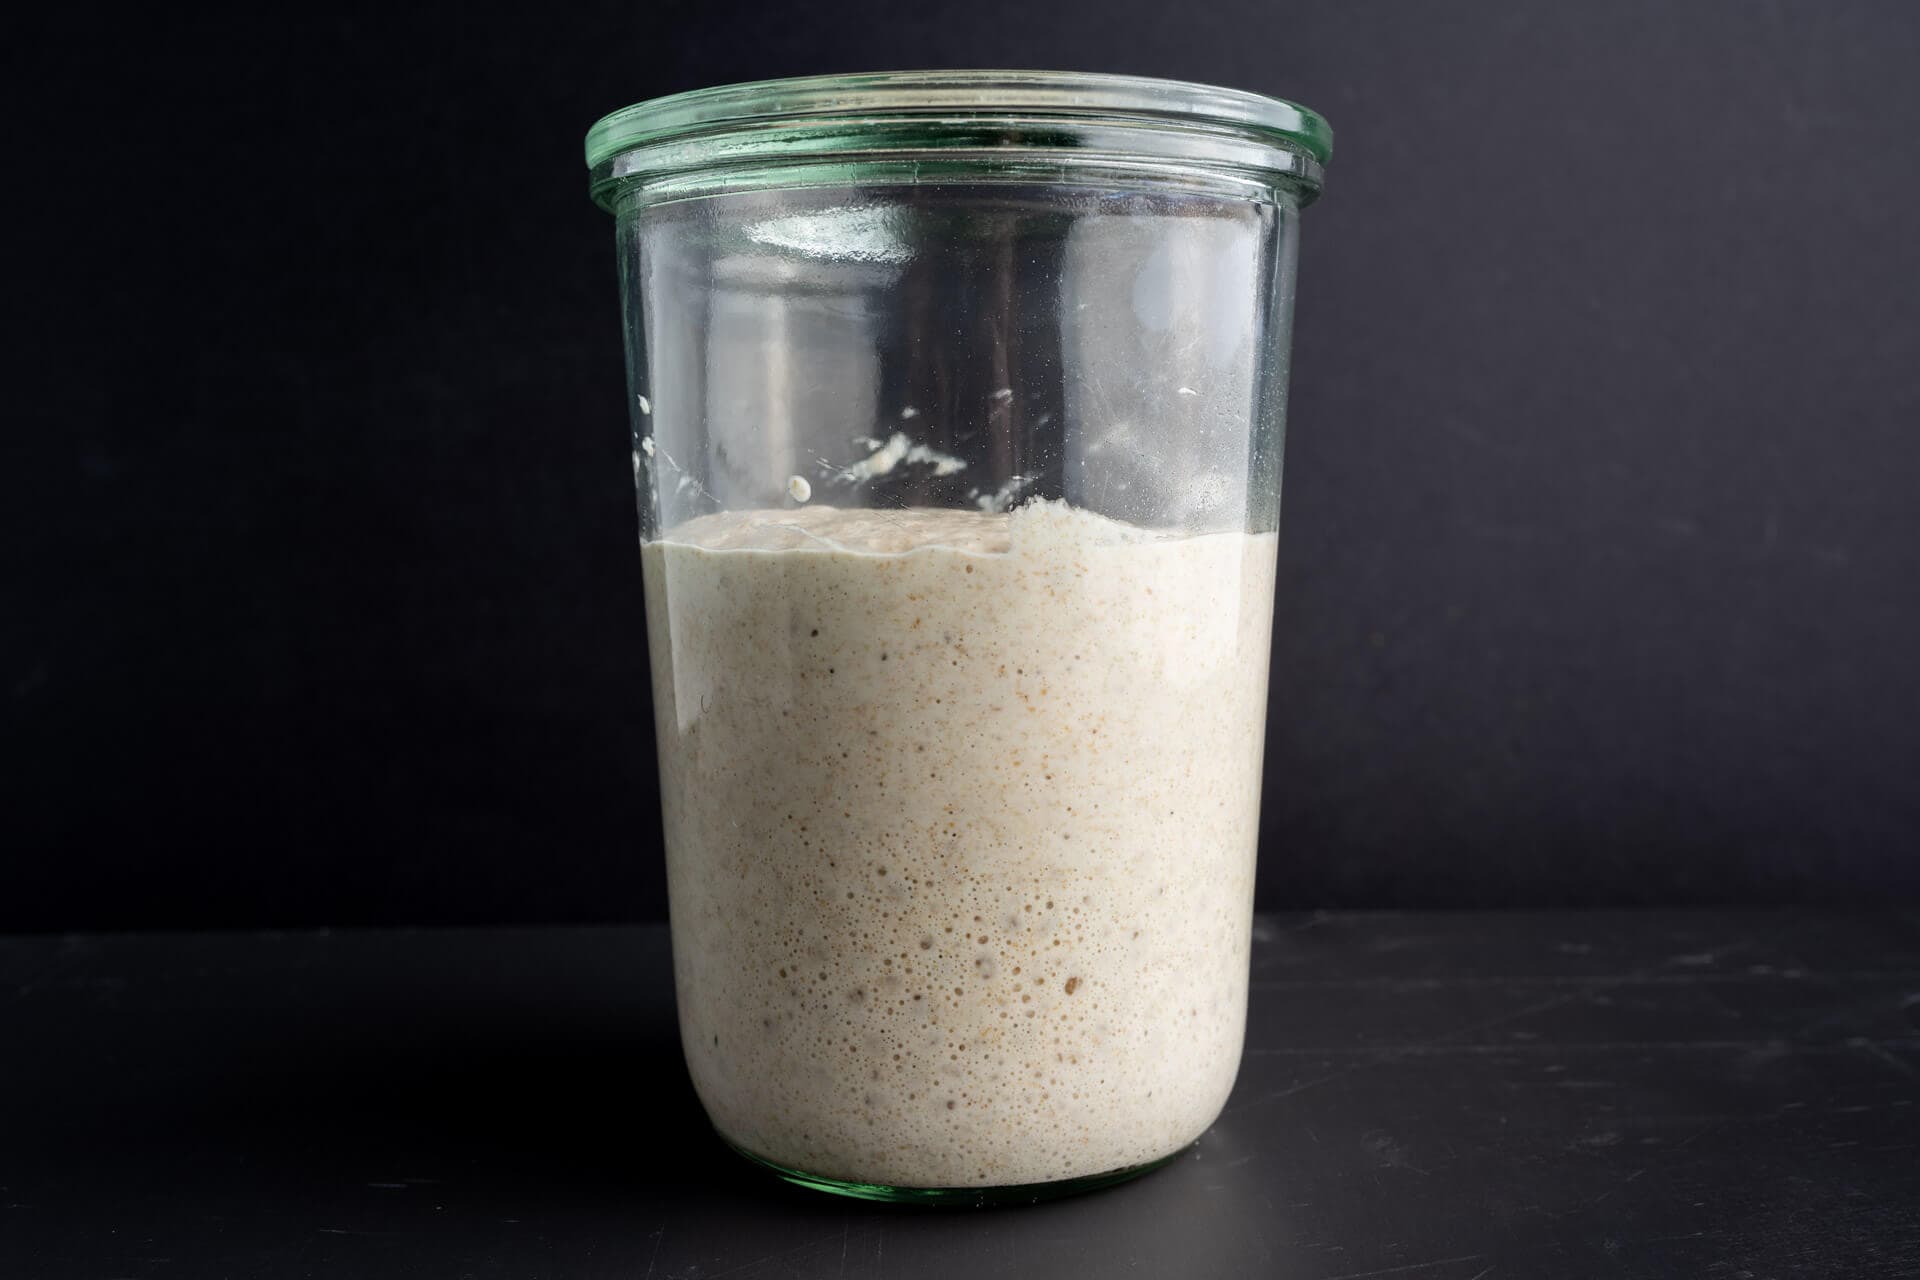 How to make sourdough starter with just 2 ingredients! %%page%%